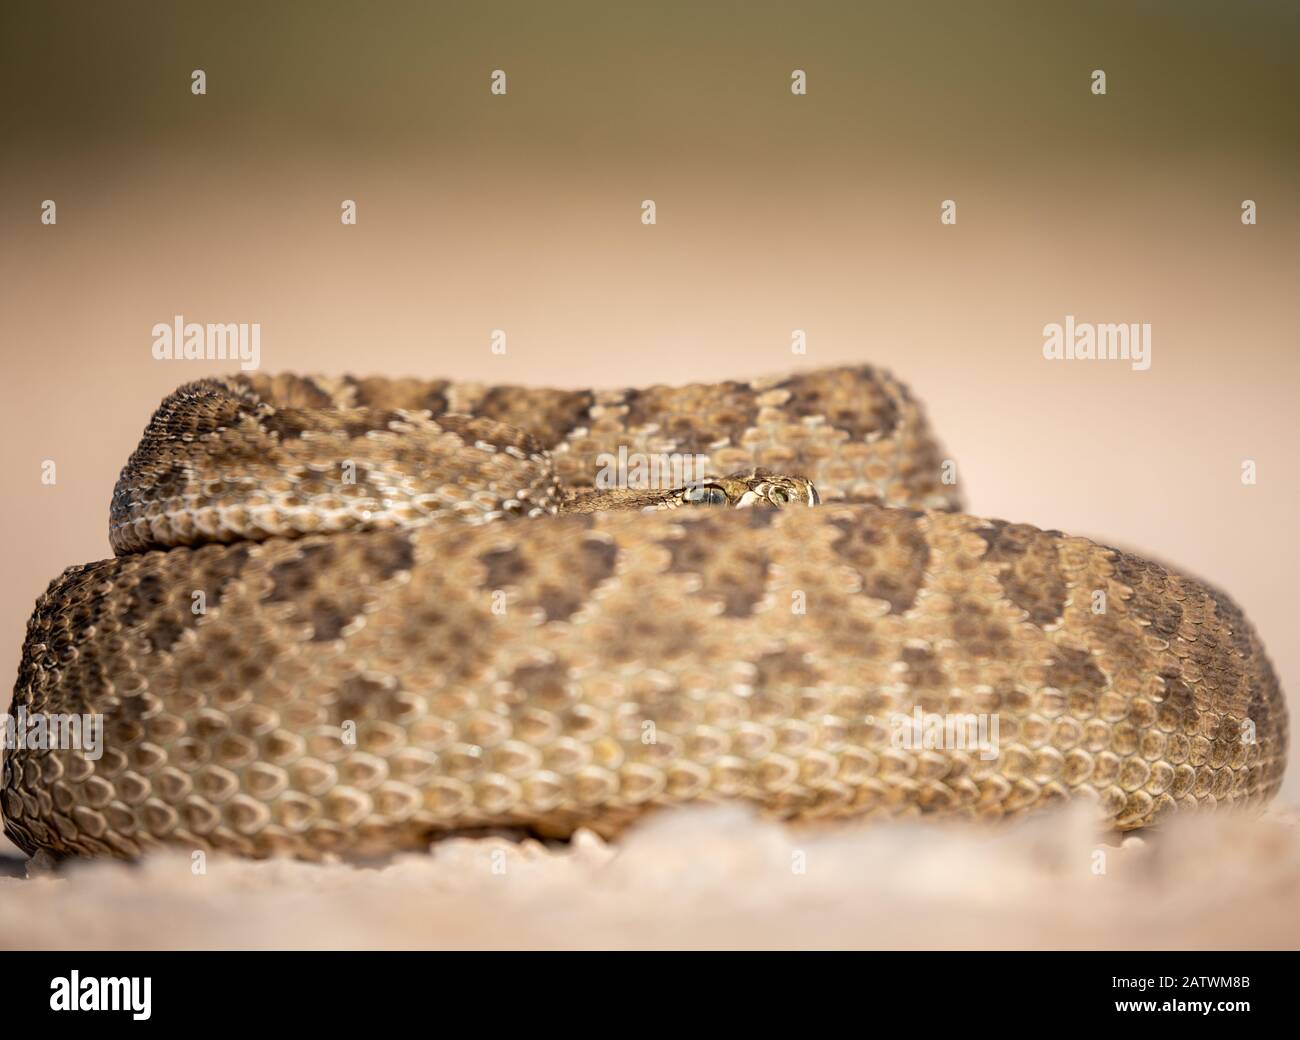 Texas Rattlesnake Curled Up ready to attack if needed, Stock Photo